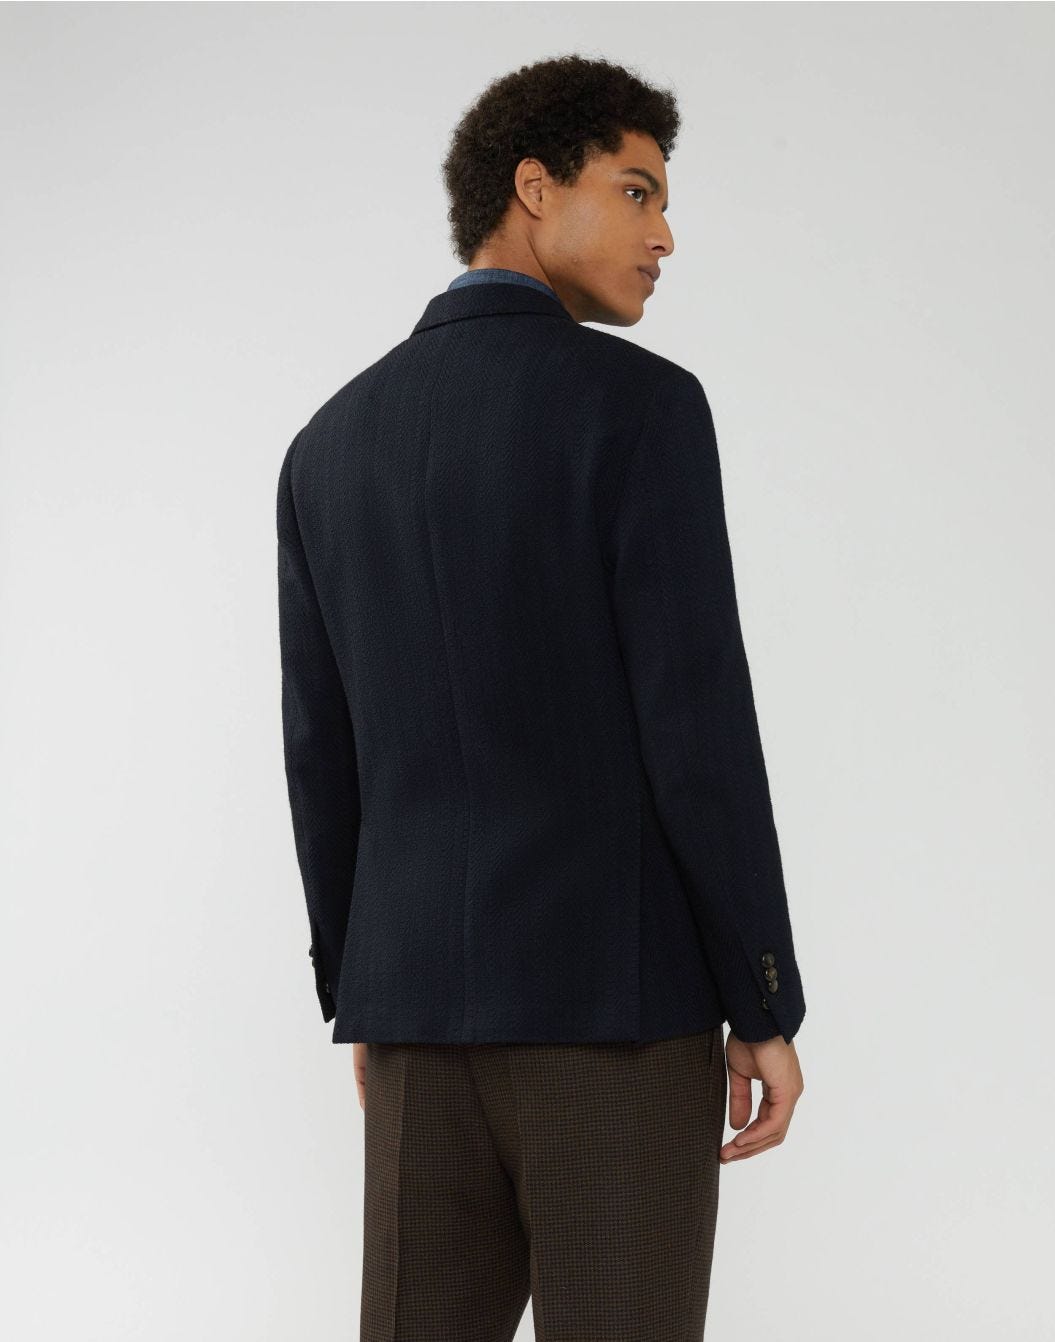 Double-breasted jacket in Mowear fabric from the Easy range